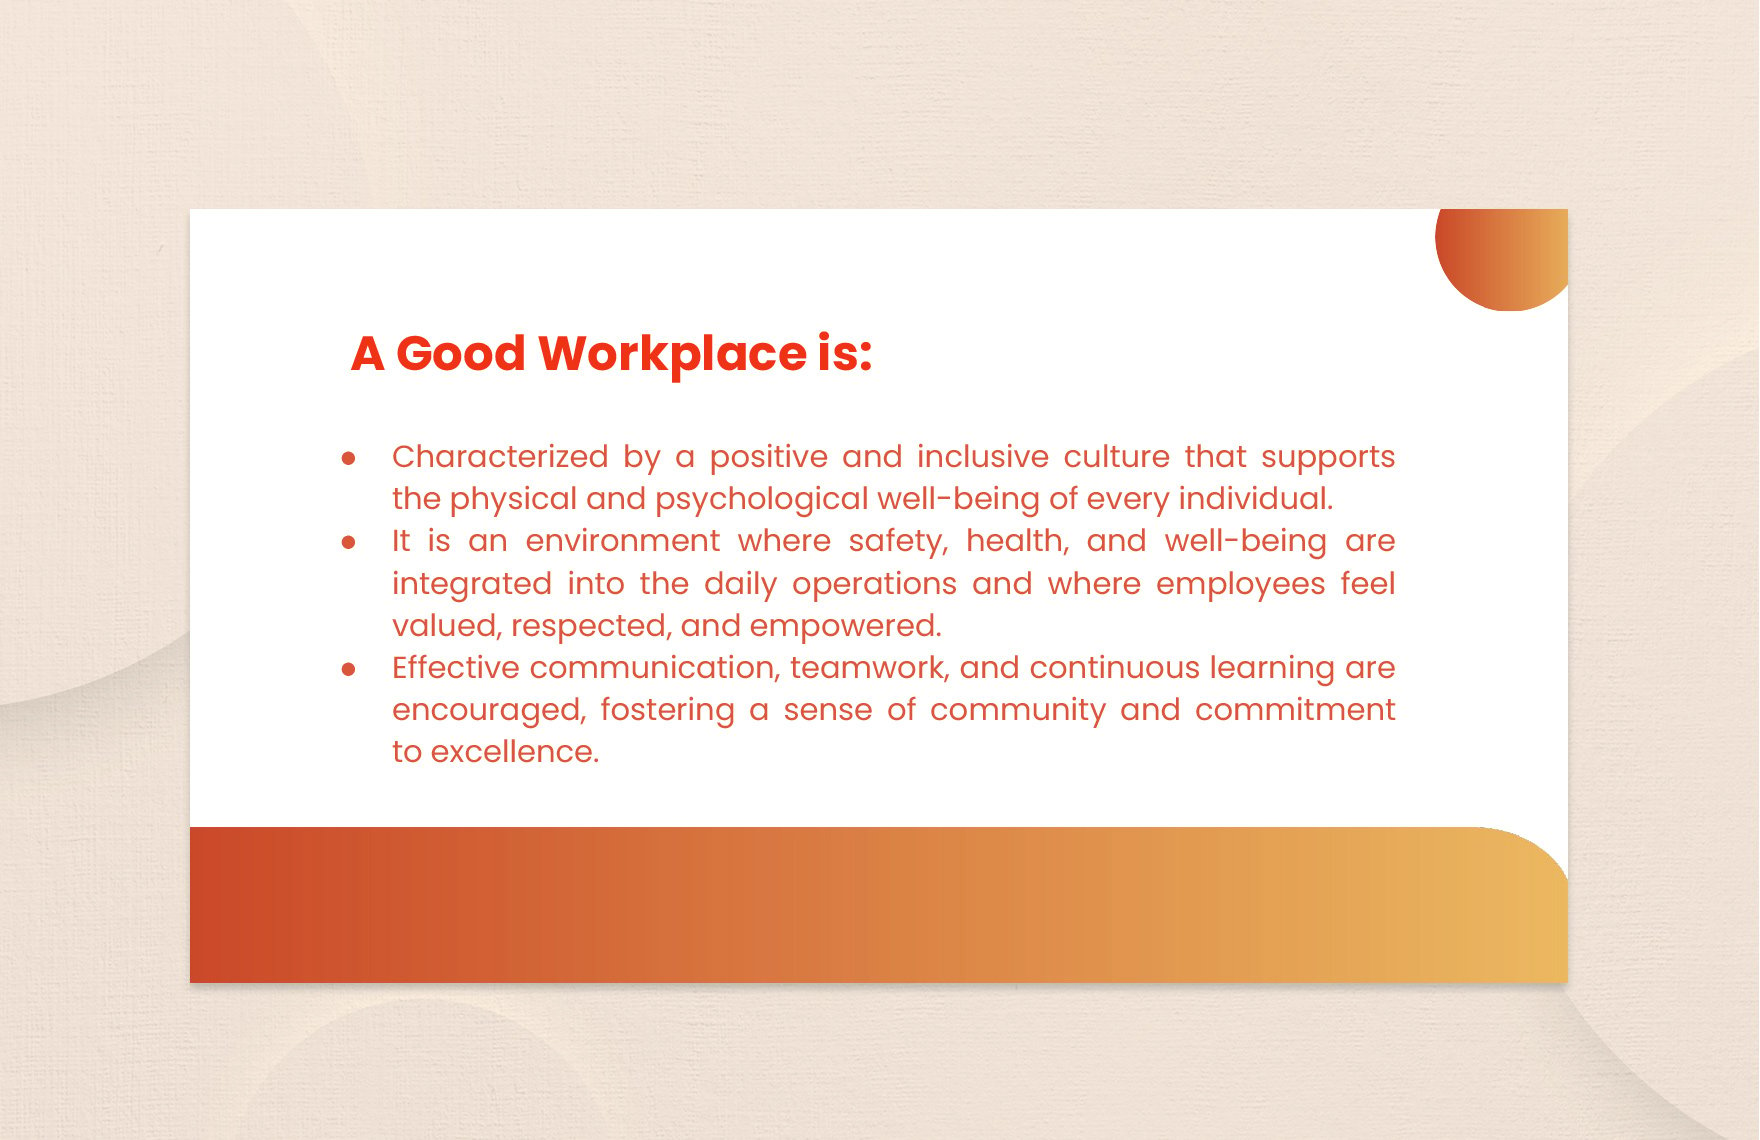 Workplace Safety and Risk Management Presentation Template